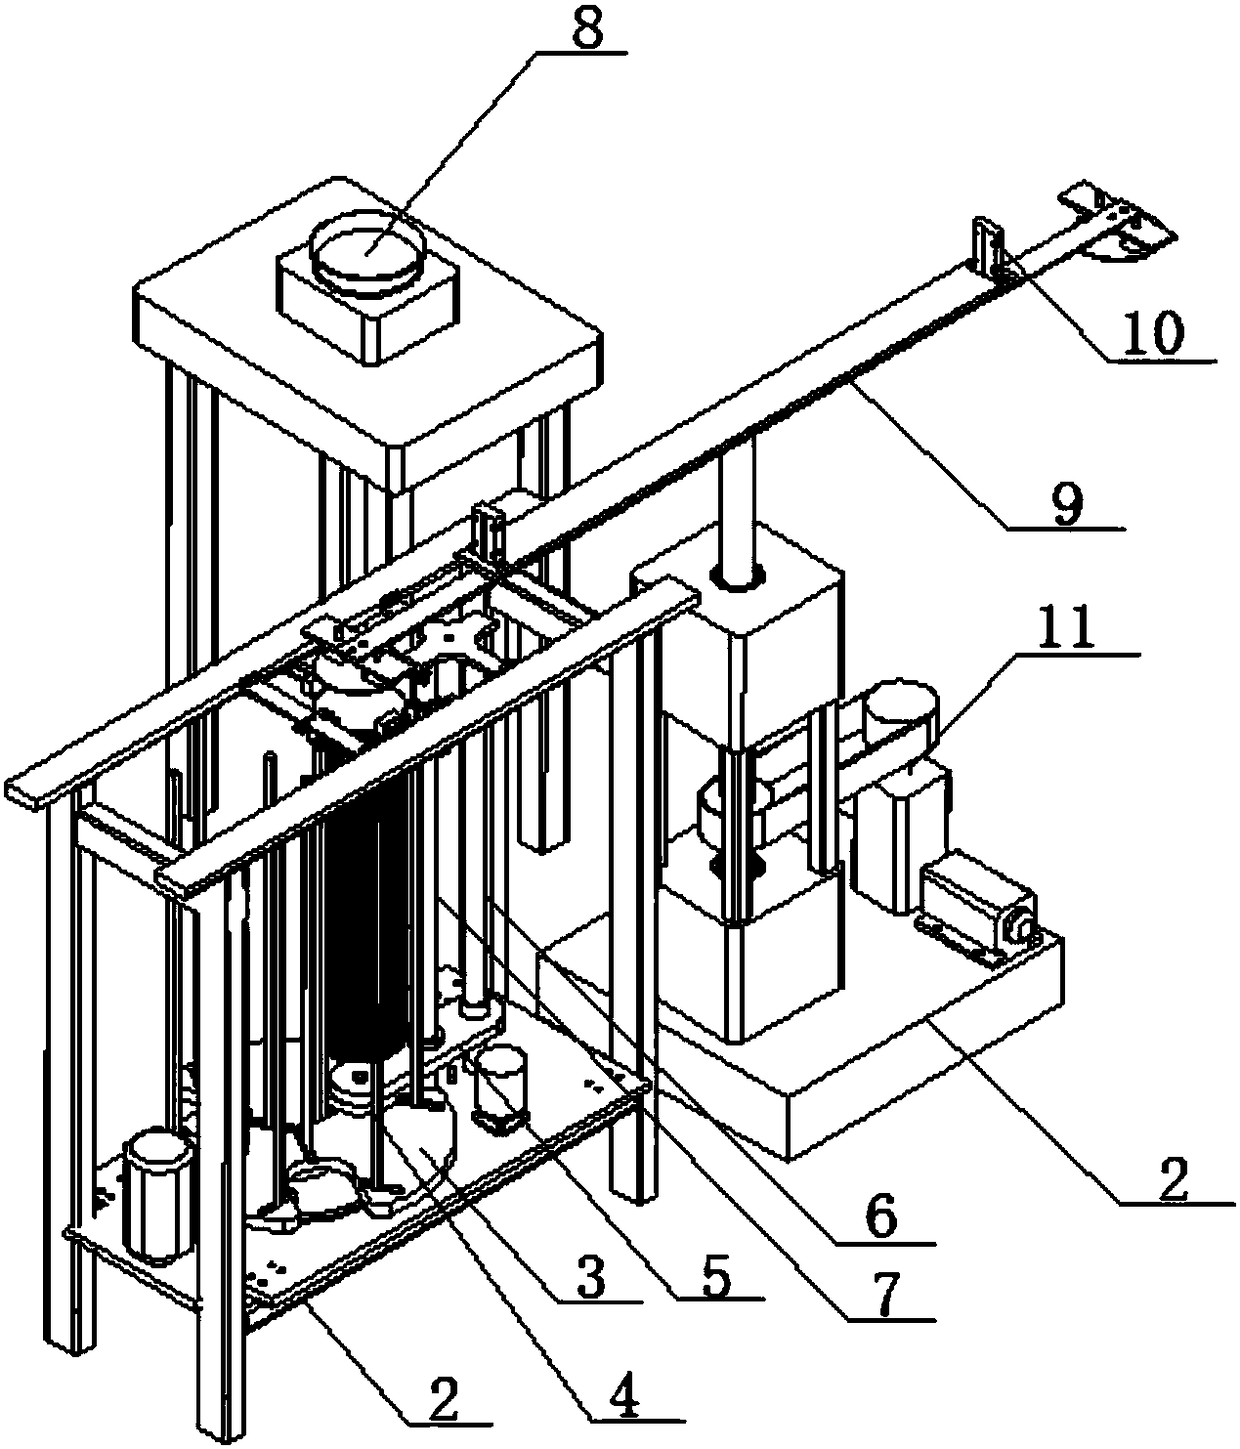 A rotary automatic feeding mechanism for a stamping machine